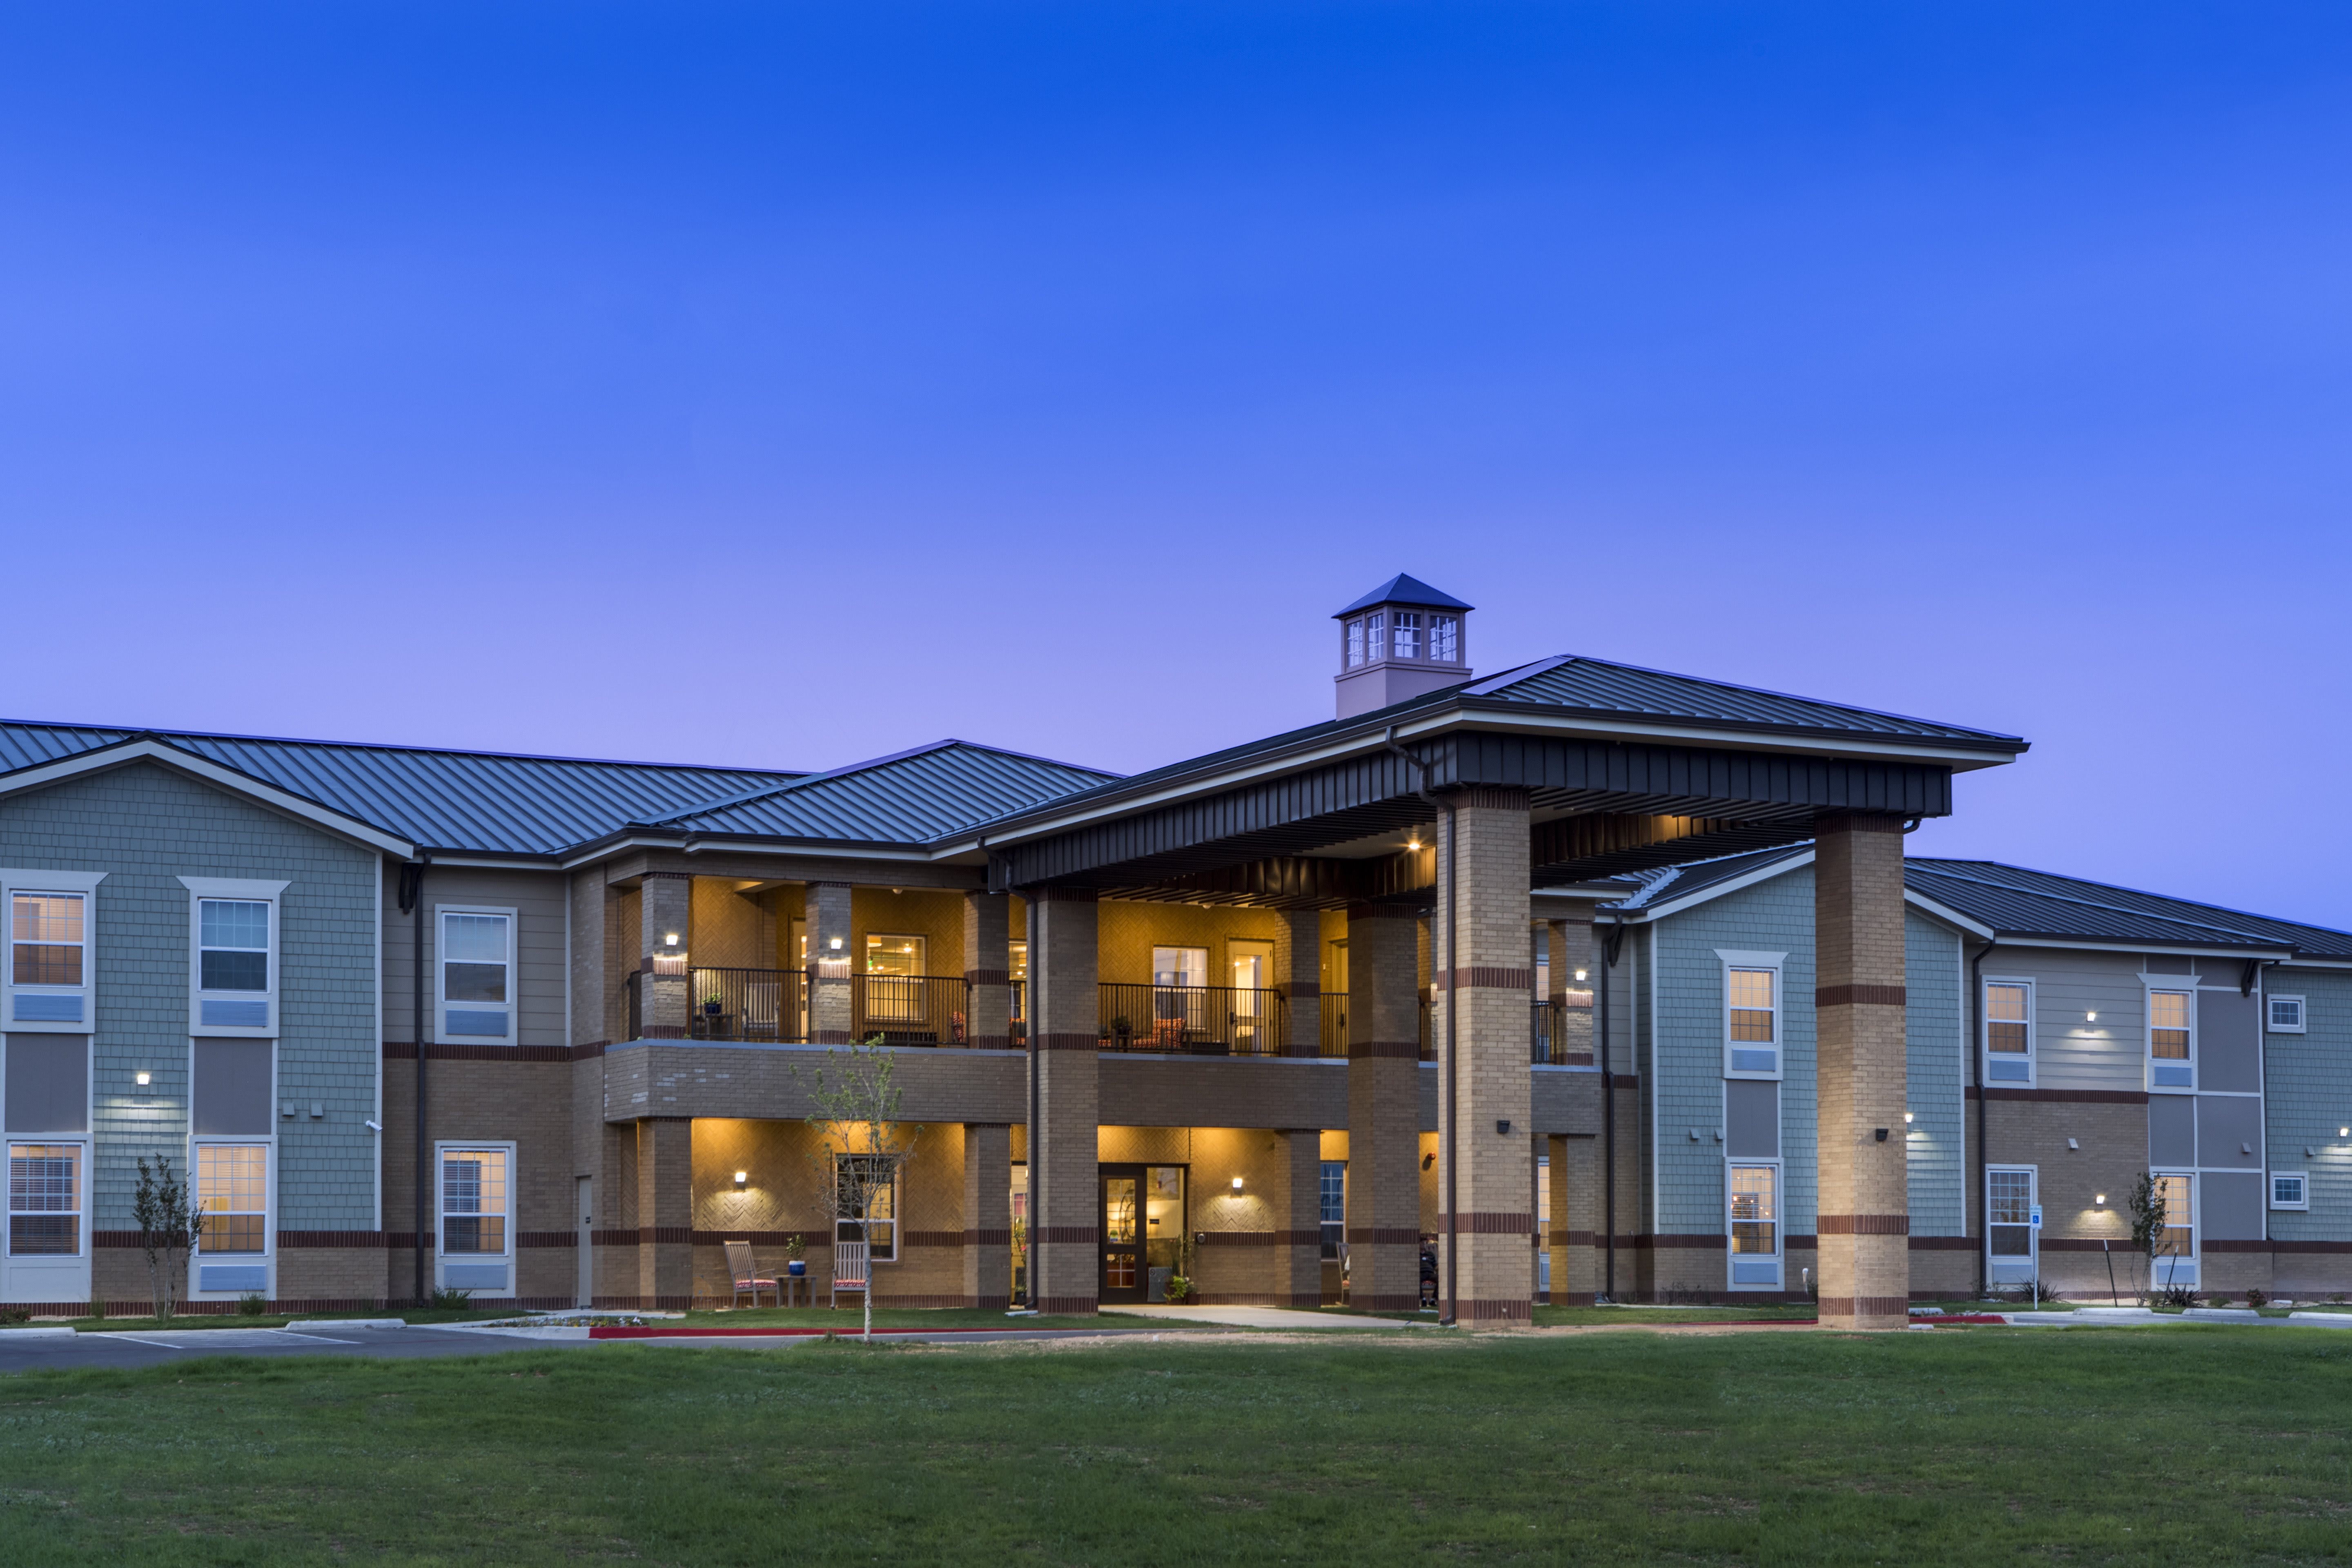 The Legacy at South Plains community exterior